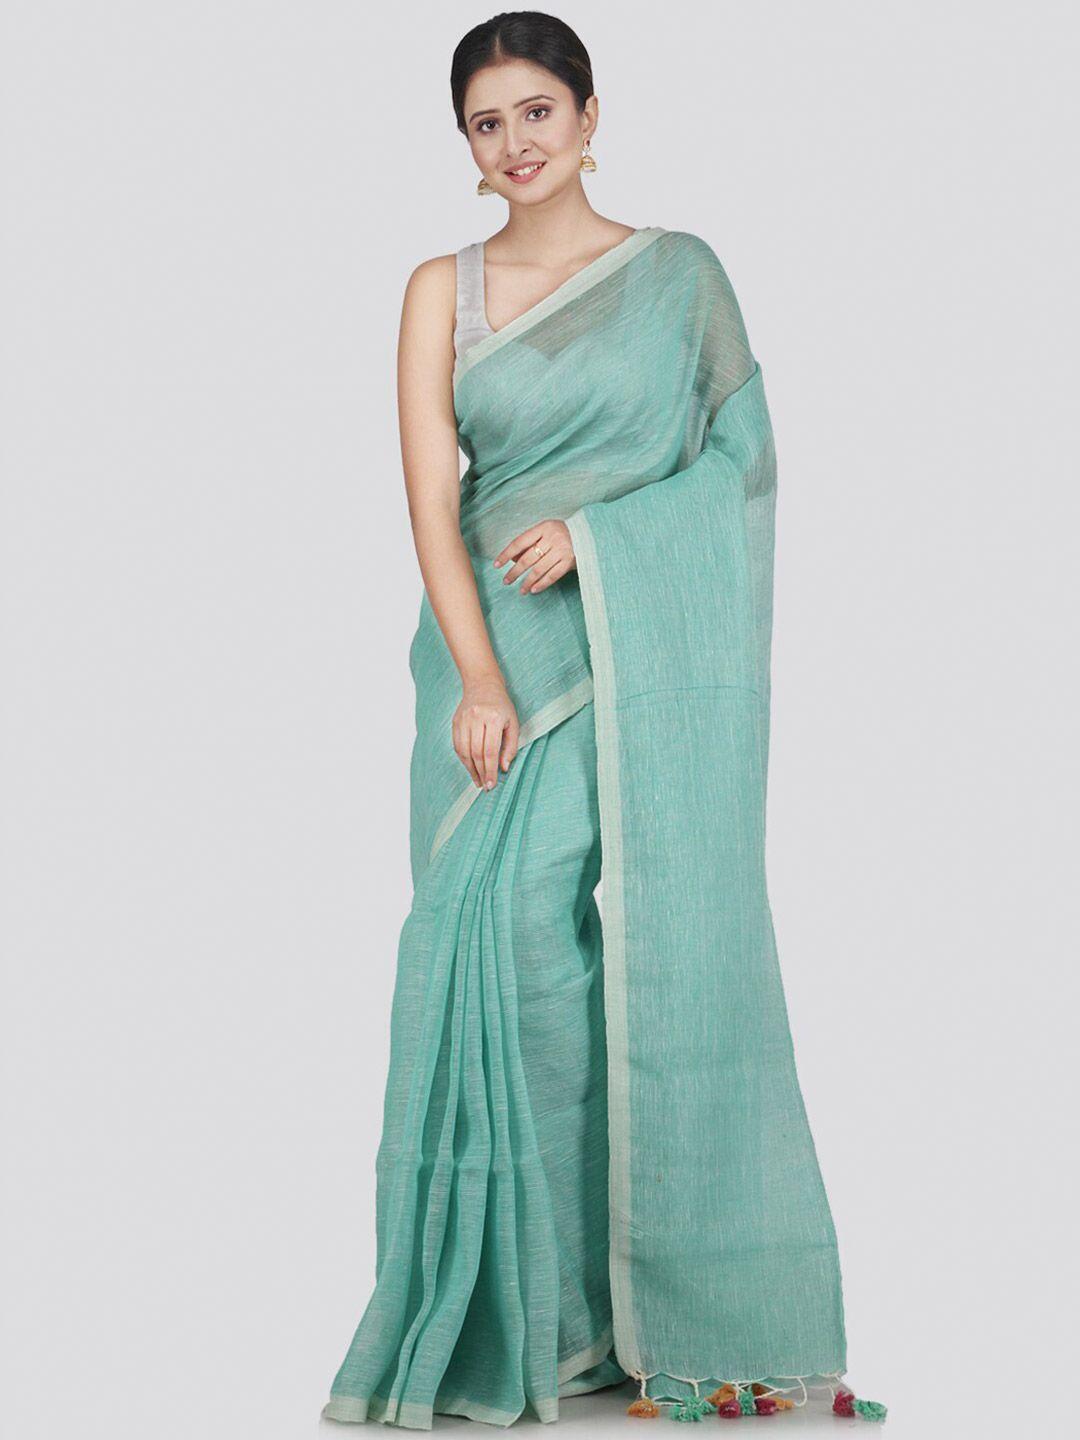 pinkloom turquoise blue & silver-toned pure linen saree